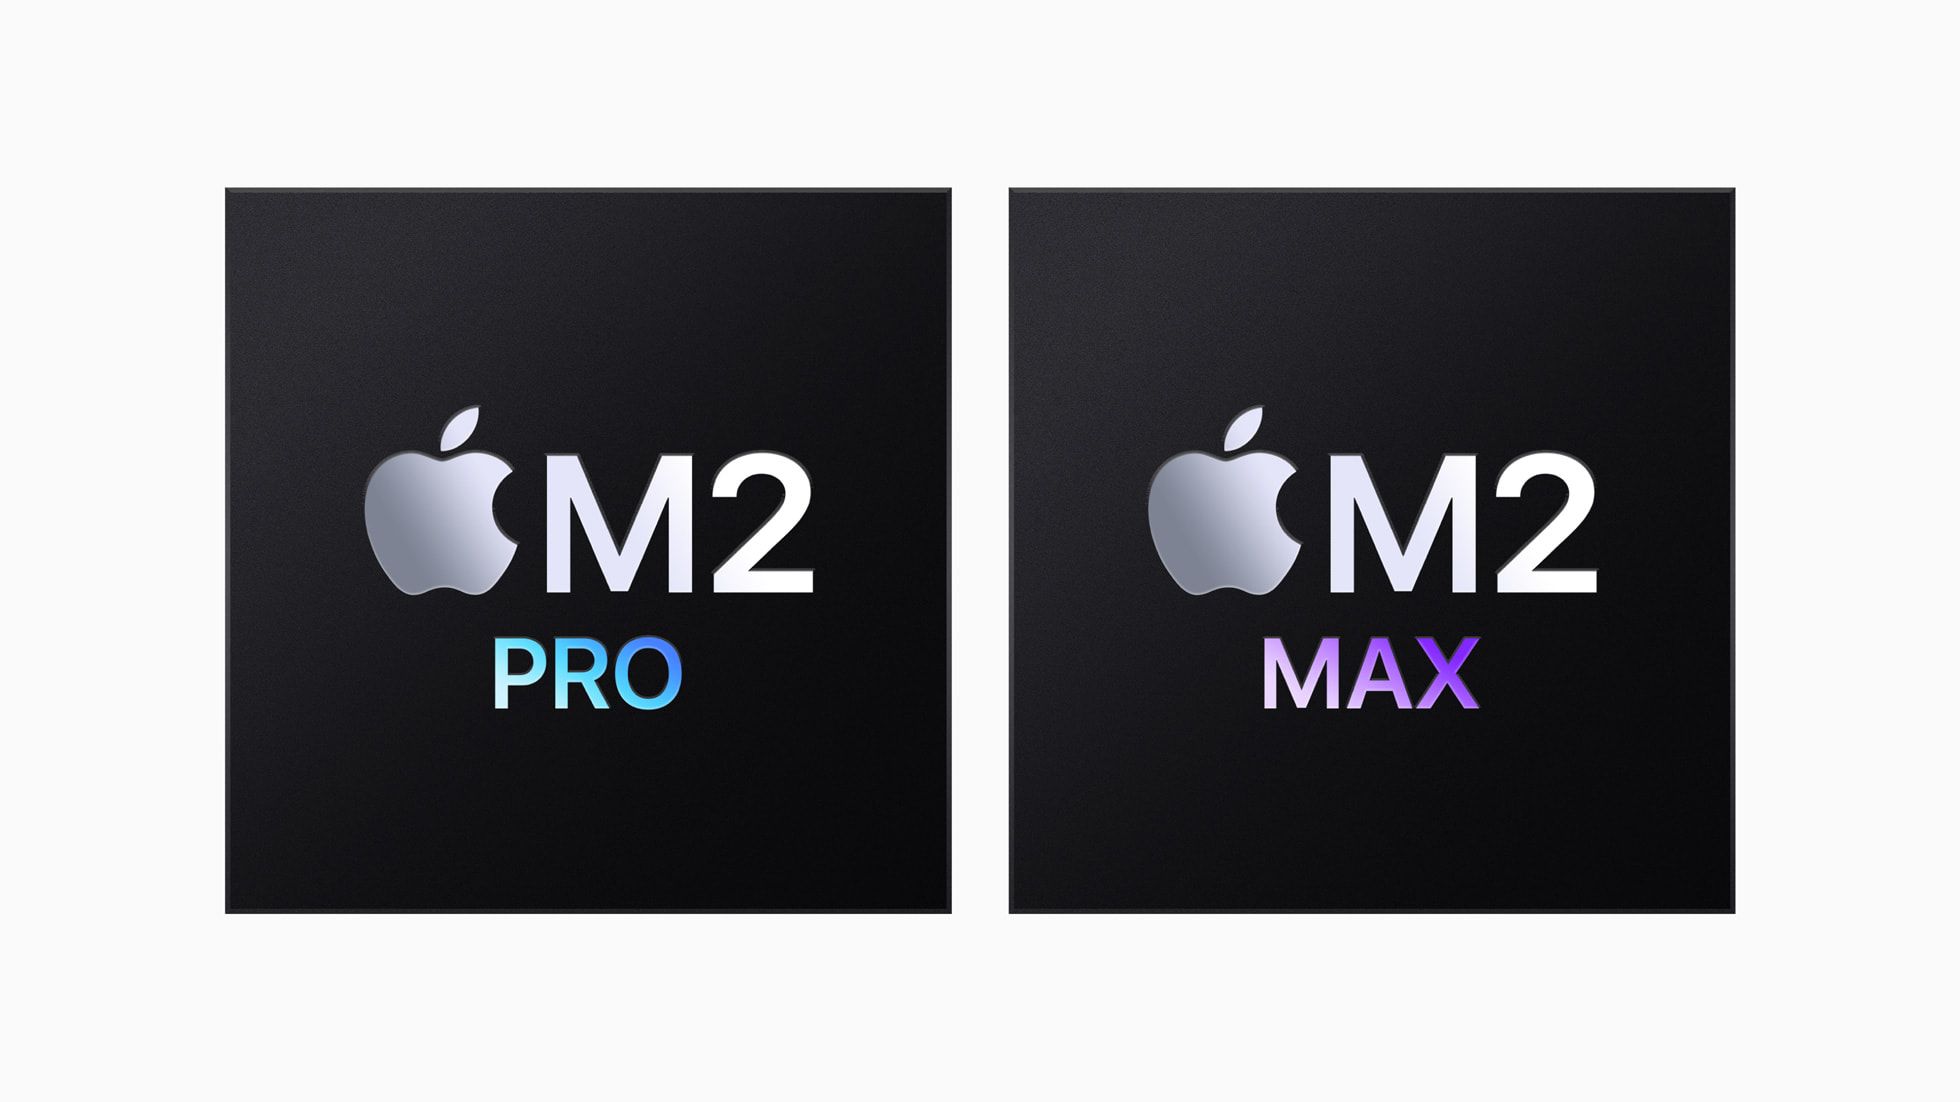 Apple M2 Pro and M2 Max chips